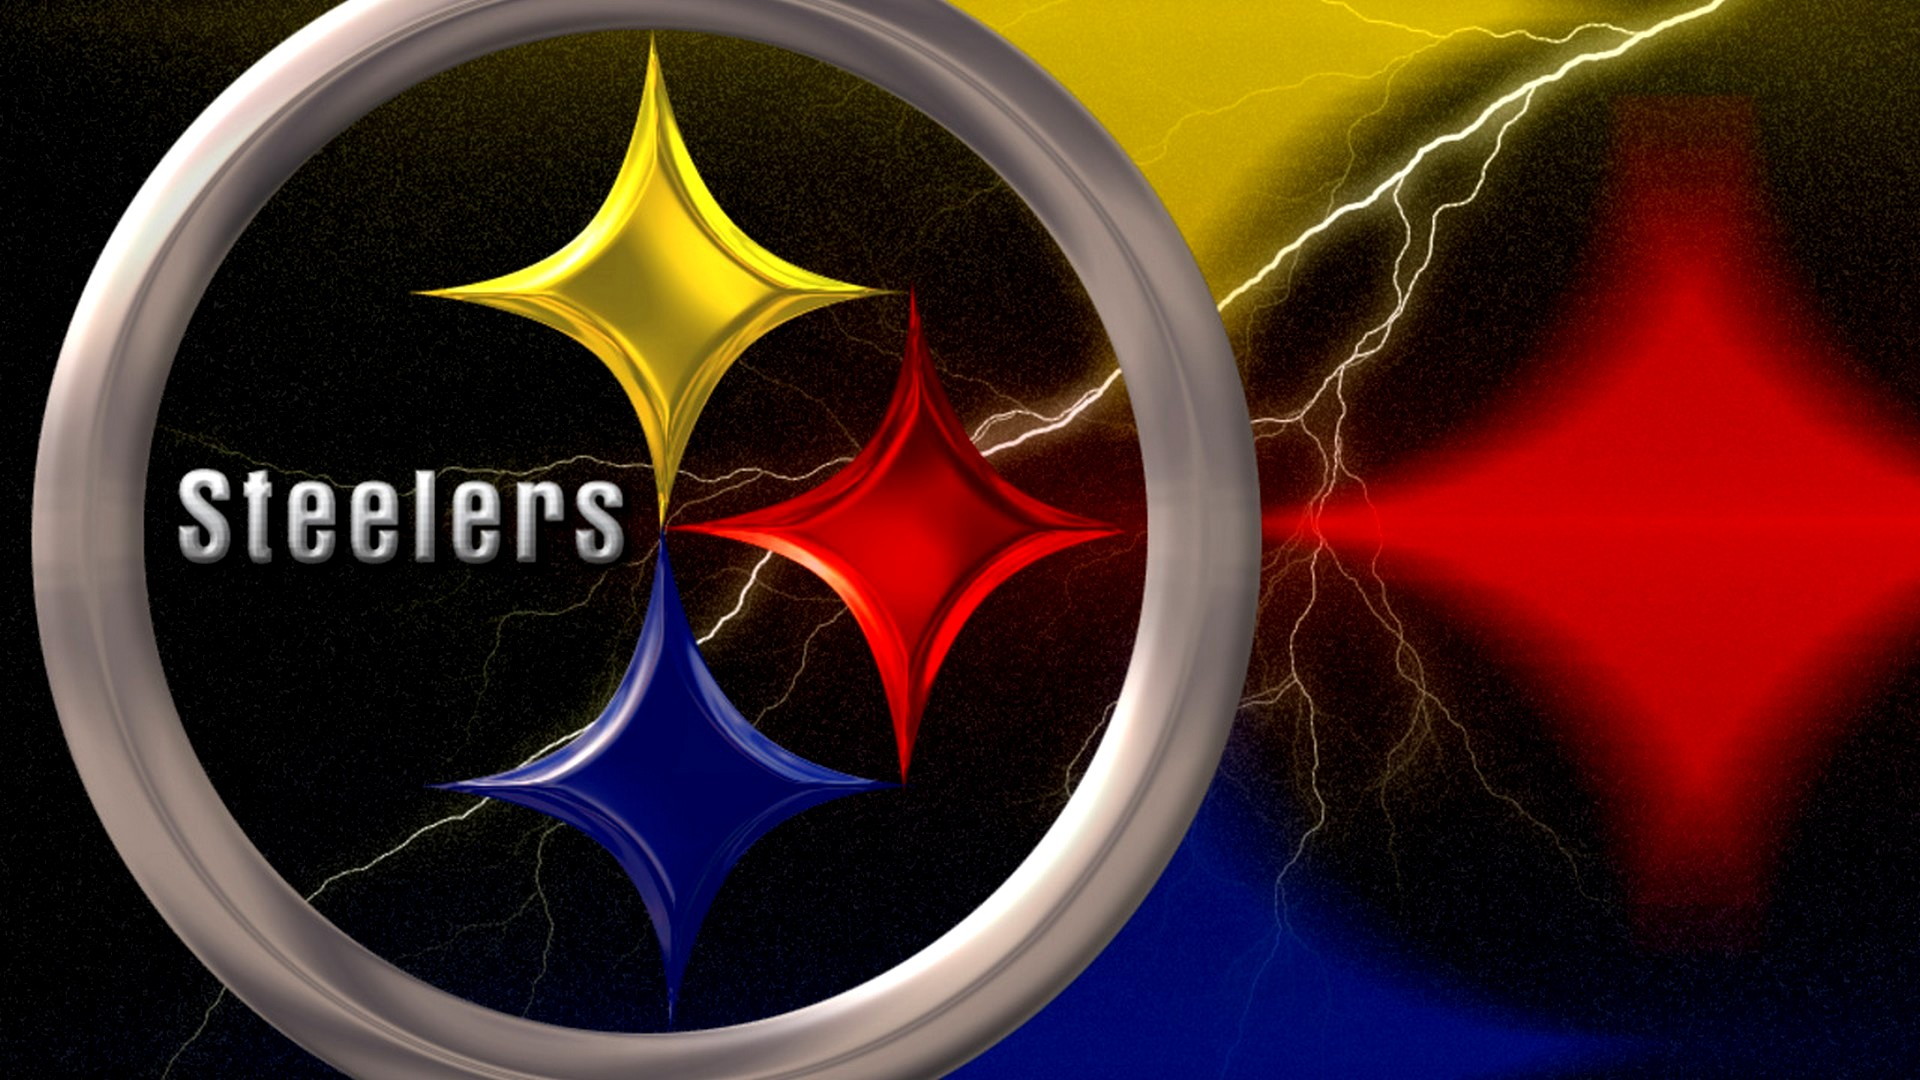 Steelers Wallpaper HD Laptop with high-resolution 1920x1080 pixel. You can use and set as wallpaper for Notebook Screensavers, Mac Wallpapers, Mobile Home Screen, iPhone or Android Phones Lock Screen